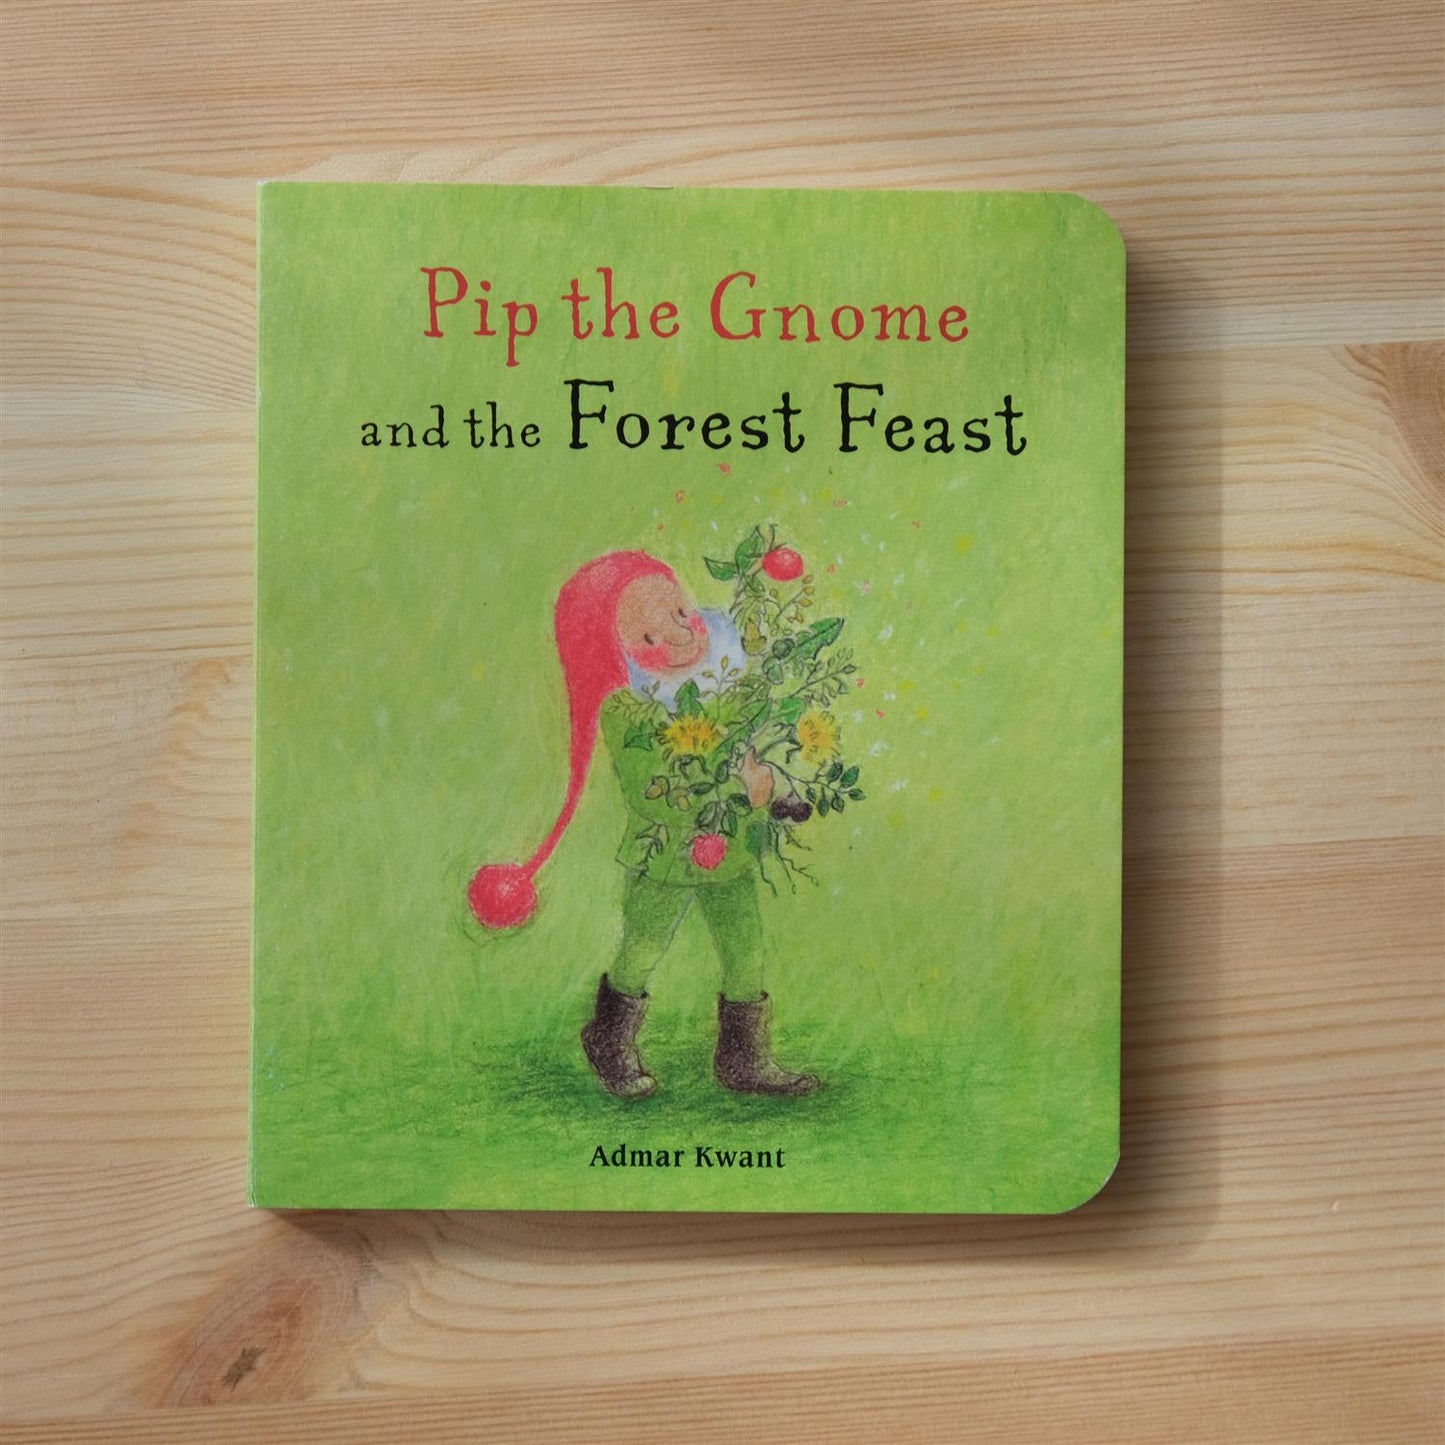 Pip the Gnome and the Forest Feast - Admar Kwant